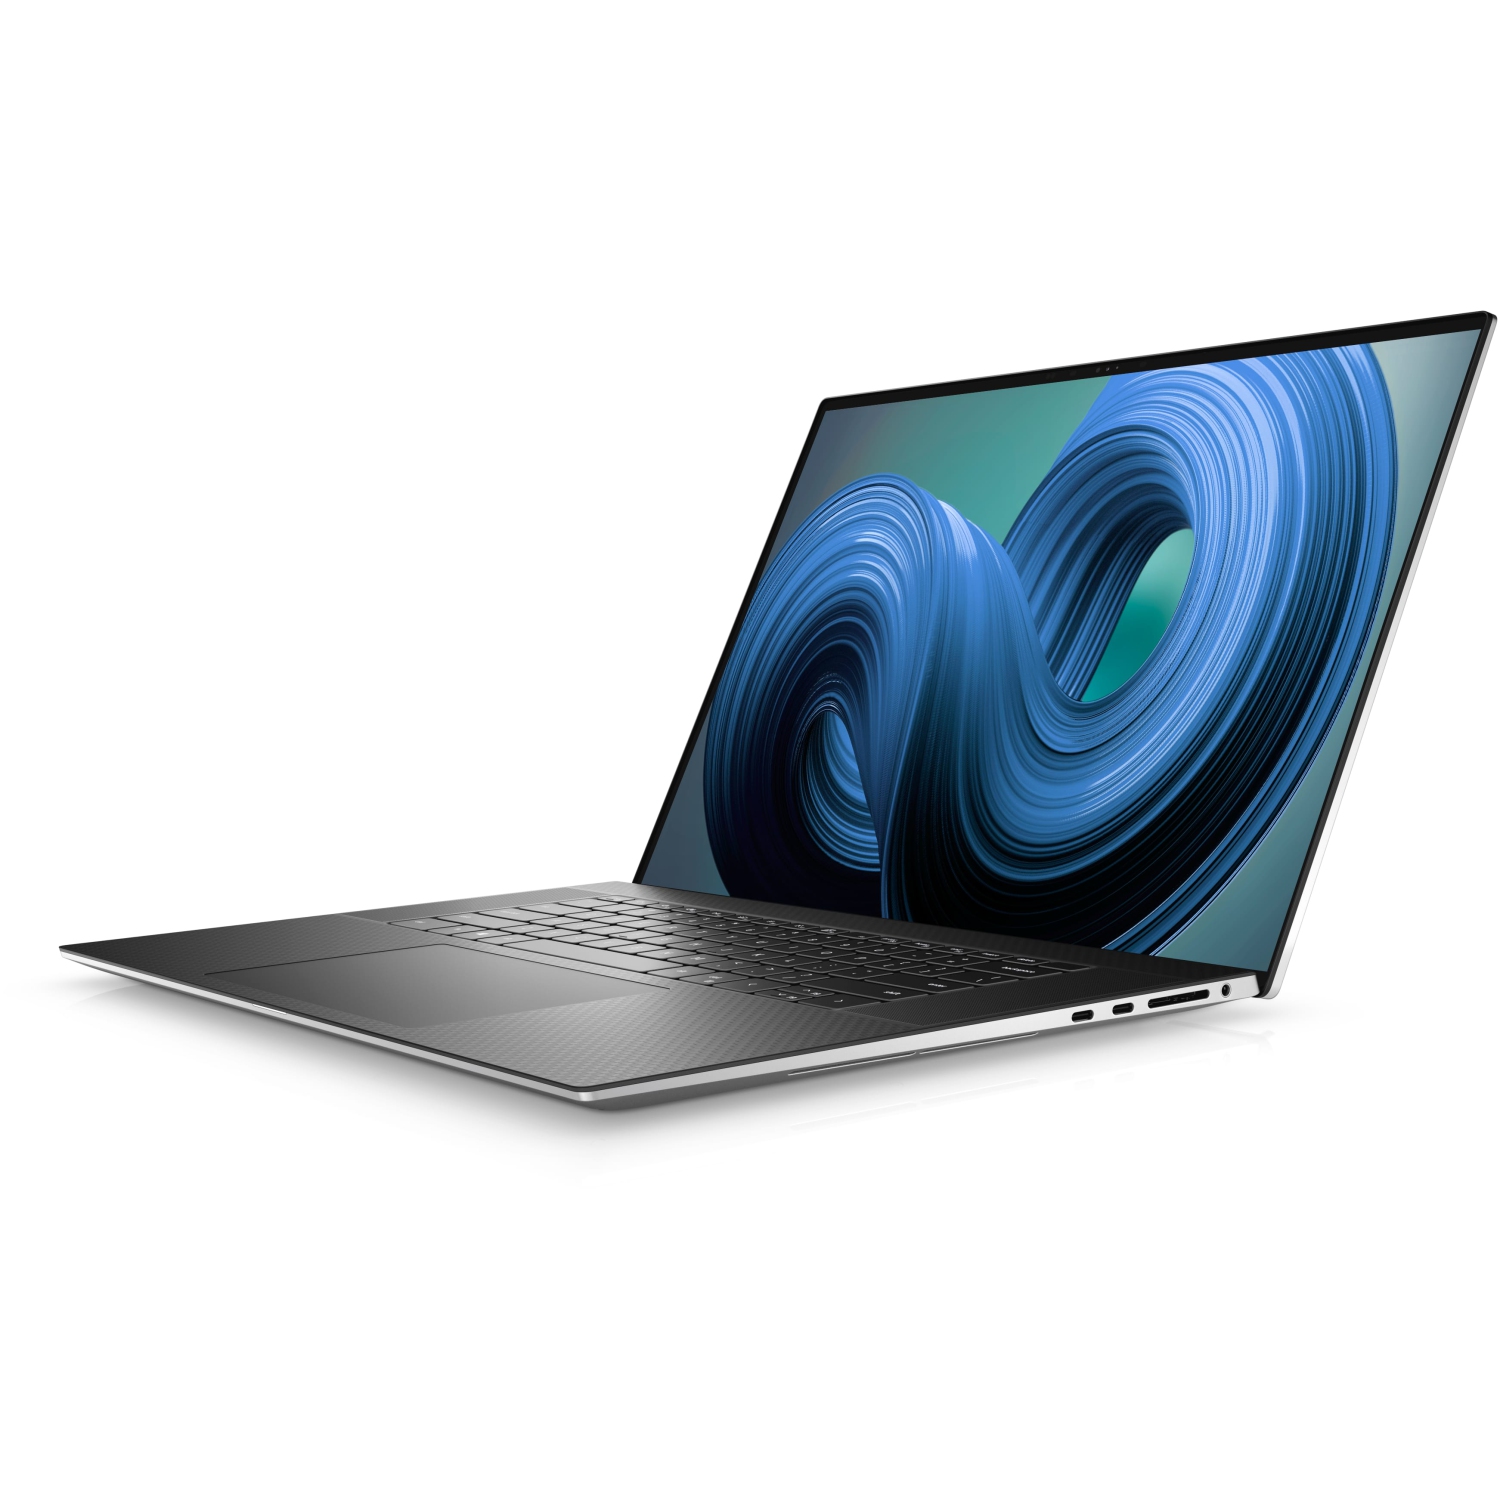 Refurbished (Excellent) – Dell XPS 9720 Laptop (2022) | 17" 4K Touch | Core i7 - 1TB SSD - 24GB RAM - RTX 3060 | 14 Cores @ 4.7 GHz - 12th Gen CPU - 12GB GDDR6